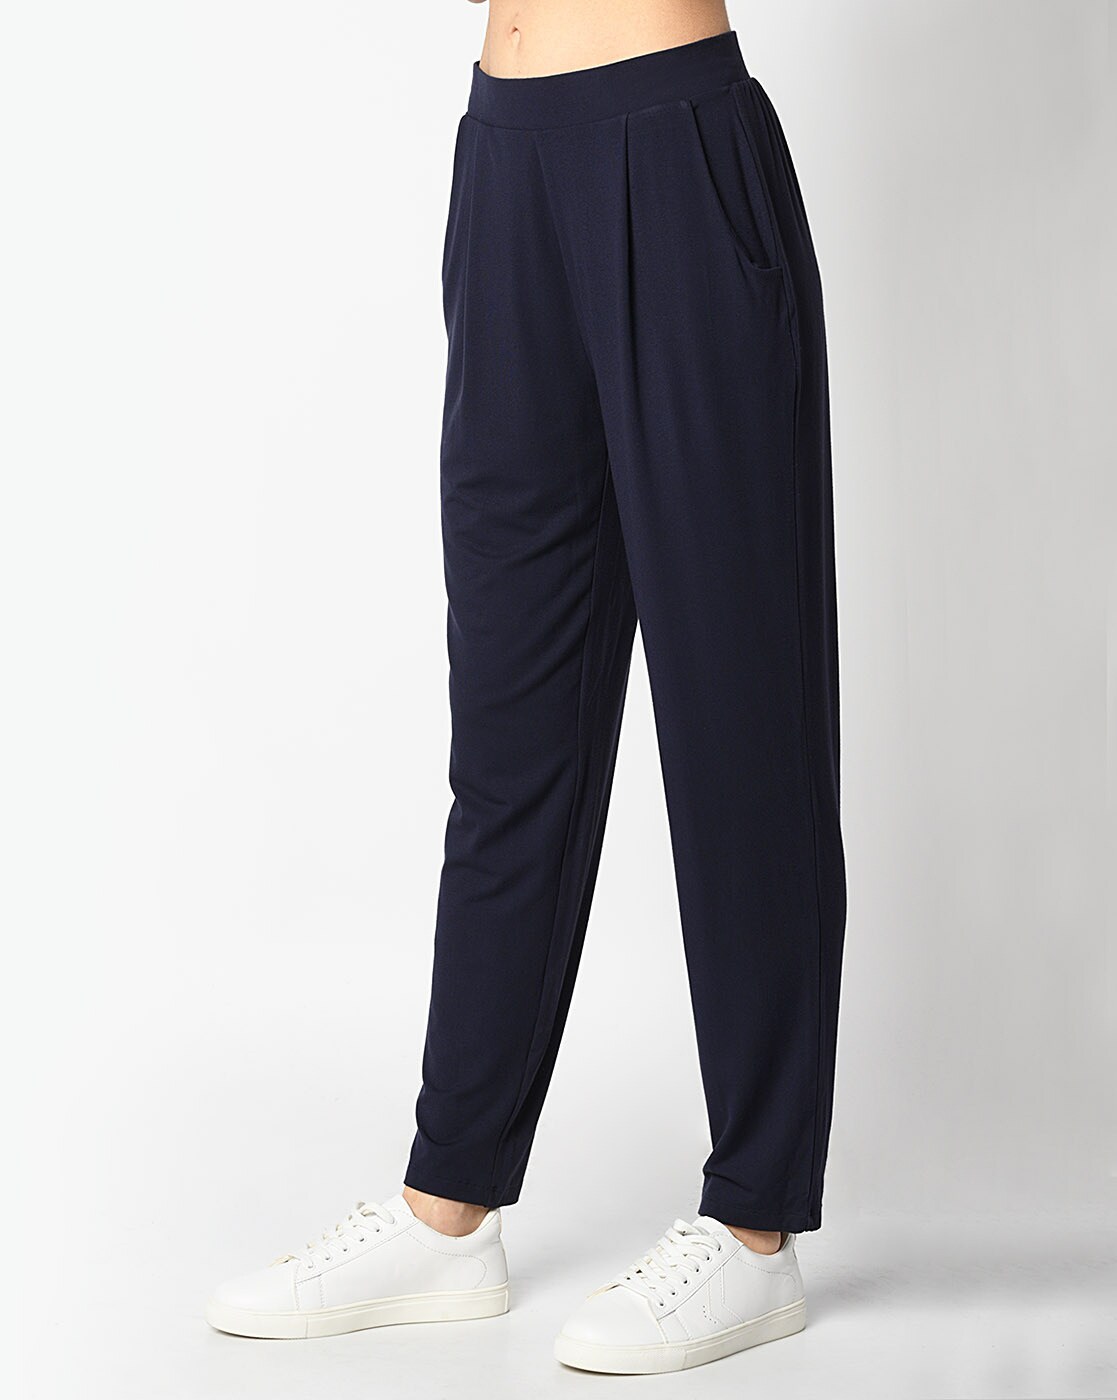 Buy Navy Blue Trousers & Pants for Women by Marks & Spencer Online